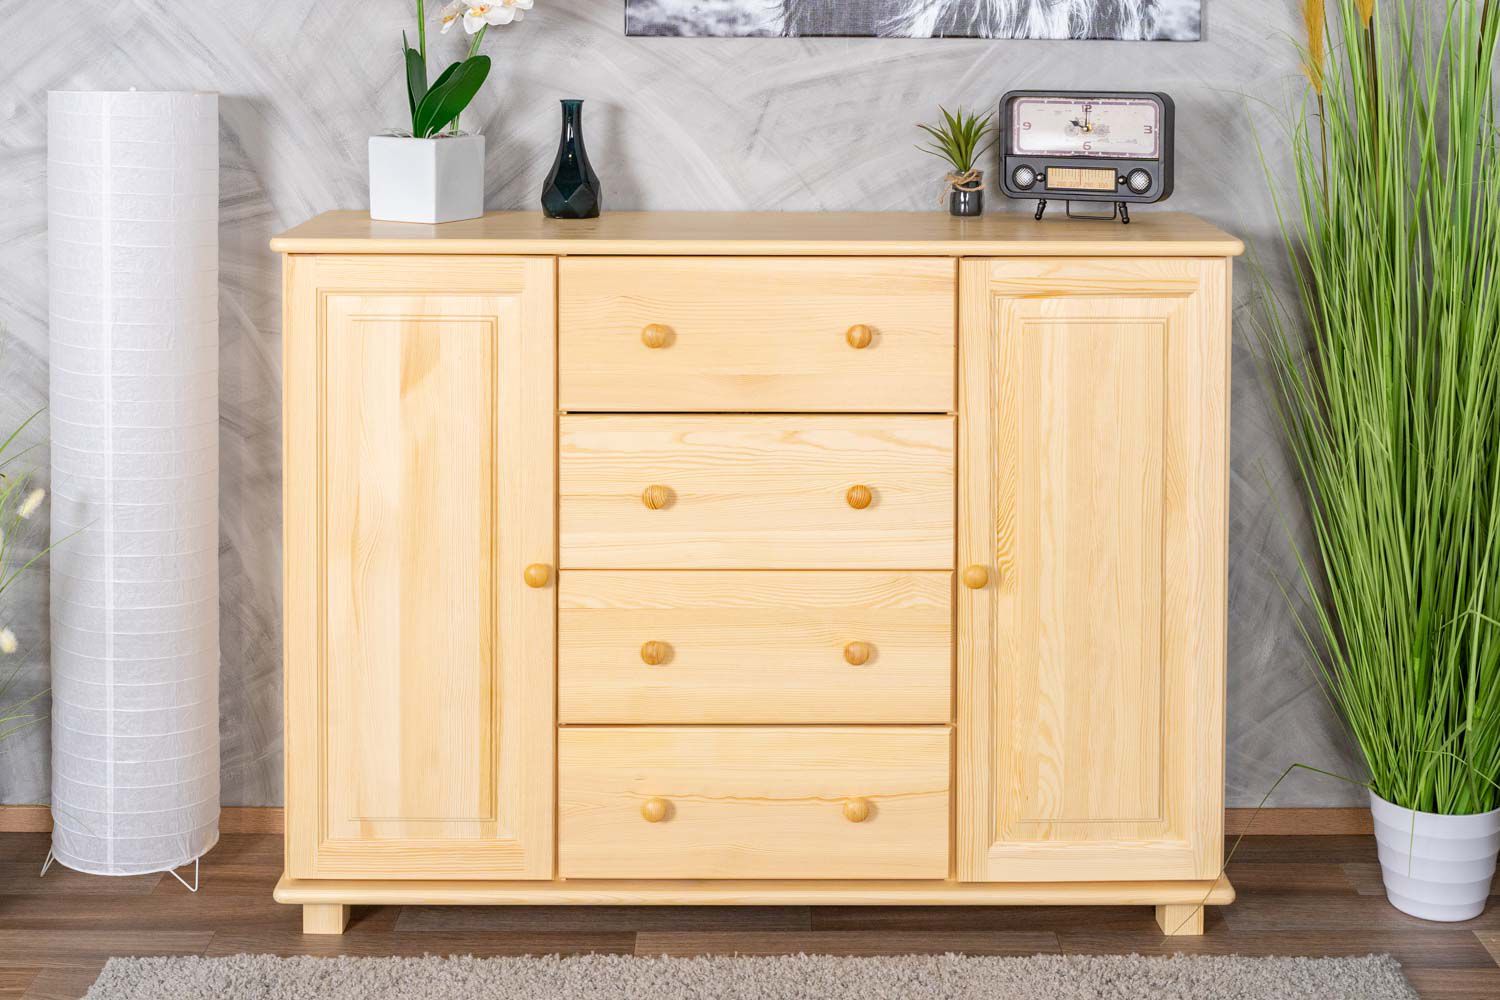 Chest of drawers solid pine solid wood natural 044 - Dimensions 100 x 136 x 42 cm (H x W x D)